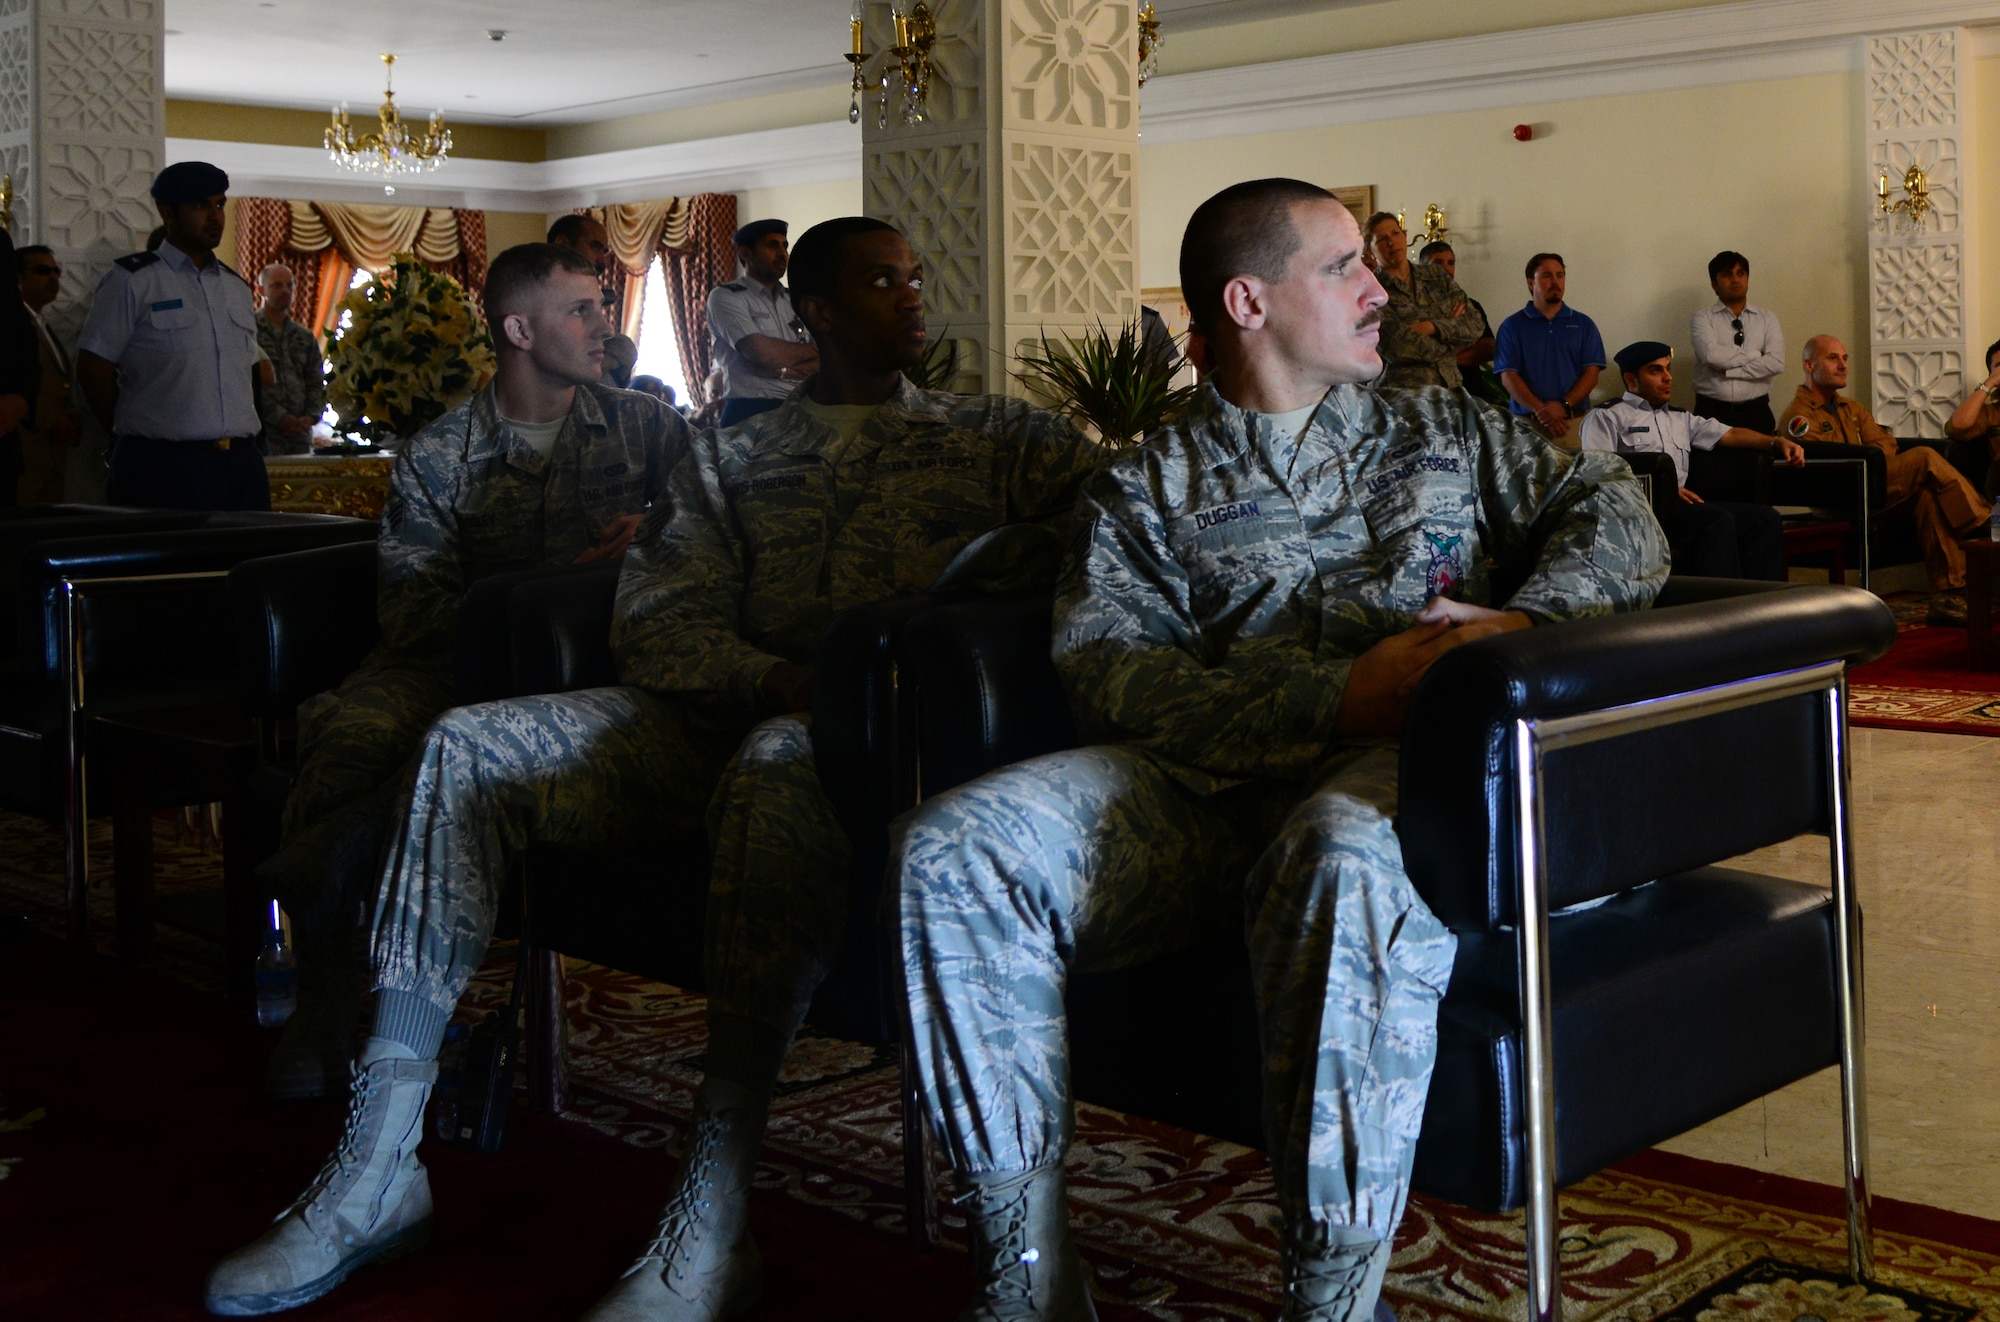 U.S. Air Force firefighters from the 379th Expeditionary Civil Engineer Squadron watch a video about the C-17 Globemaster III during the Qatar Emiri Air Force’s Air Lift Wing’s C-17 5th year anniversary ceremony Nov. 7, 2014, at Al Udeid Air Base, Qatar. During this ceremony, the firefighters were presented with certificates of appreciation for their help in putting out a C-17 fire on Sept. 6, here. (U.S. Air Force photo by Senior Airman Kia Atkins)